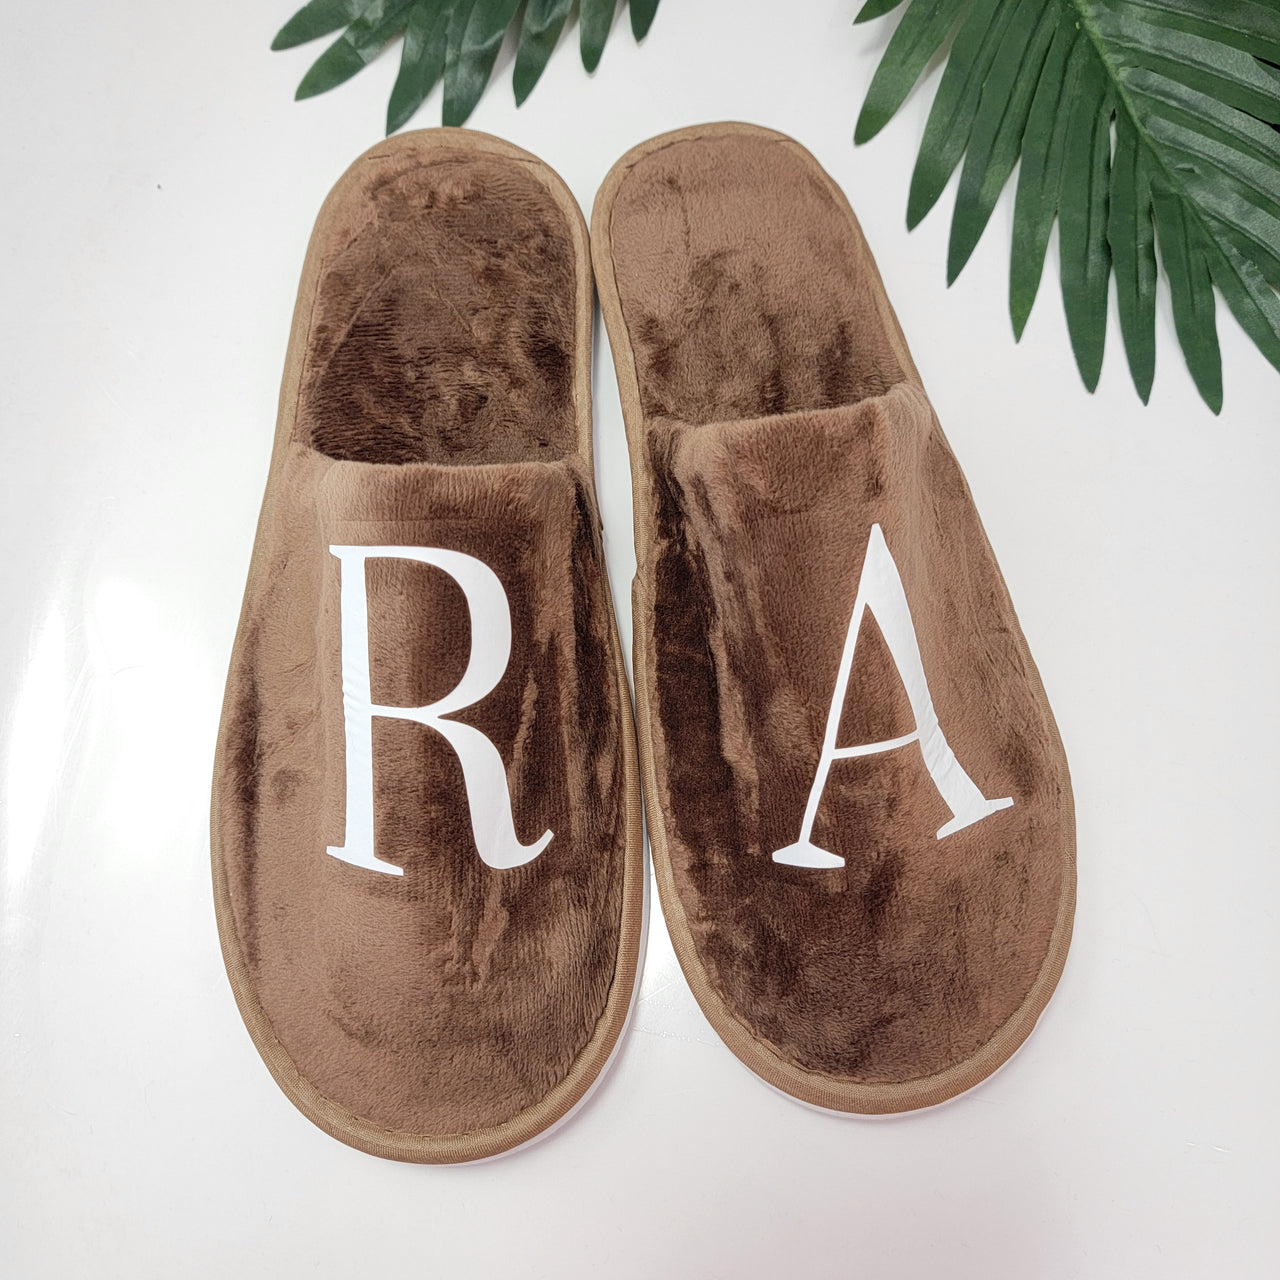 Large Letter Slippers - 3 Colors - SewingSeams